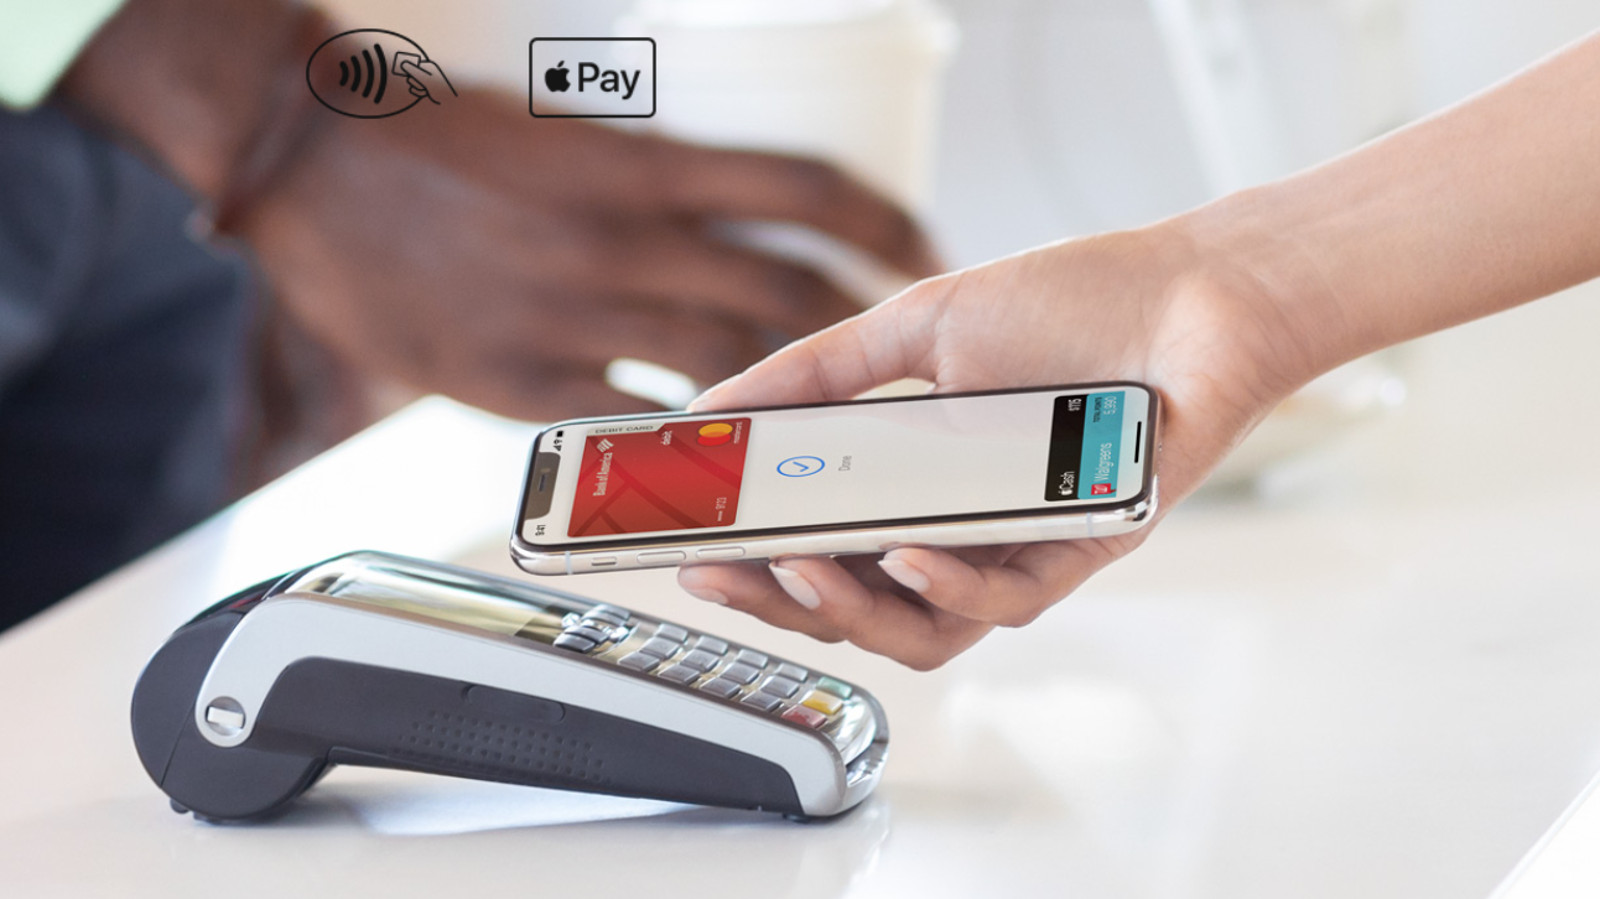 Apple Pay on an iPhone at a point of sale terminal.